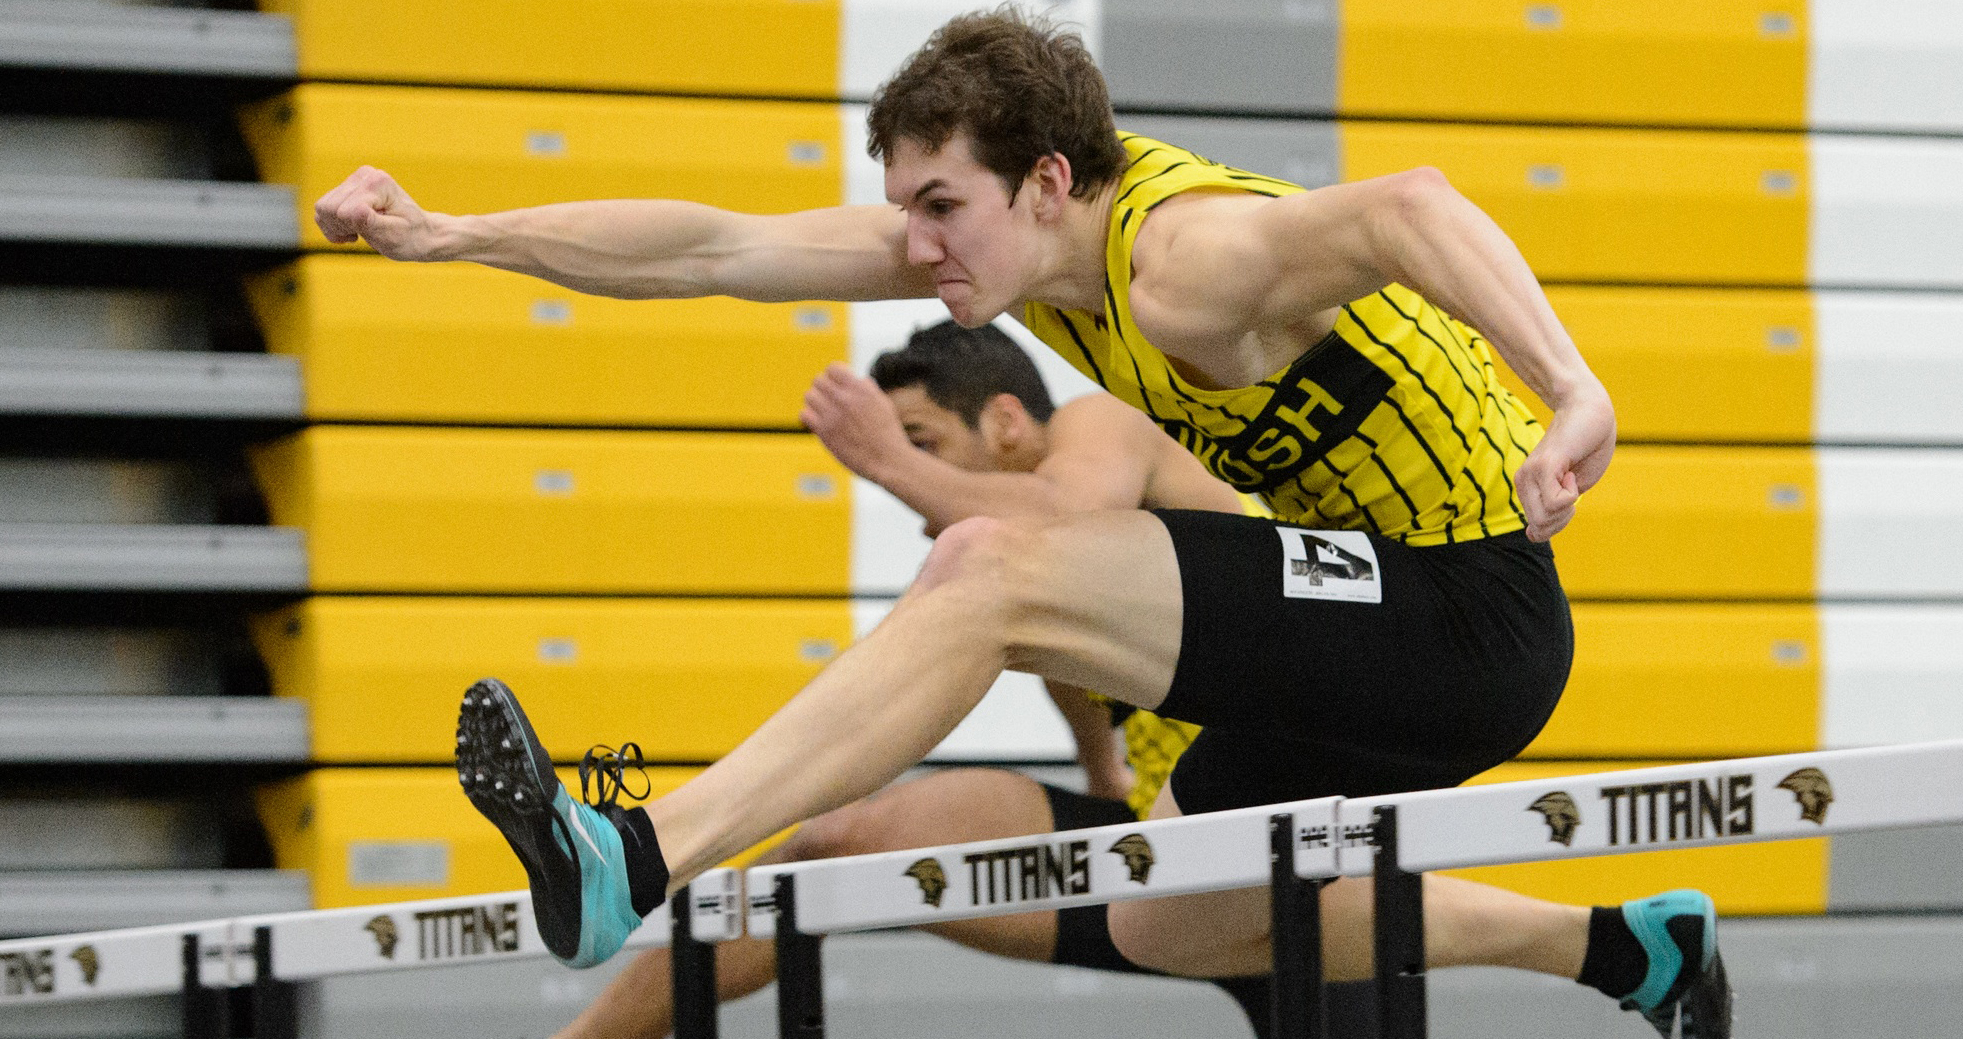 Garrison Griest won the 60-meter hurdles with a time of 8.64 seconds.